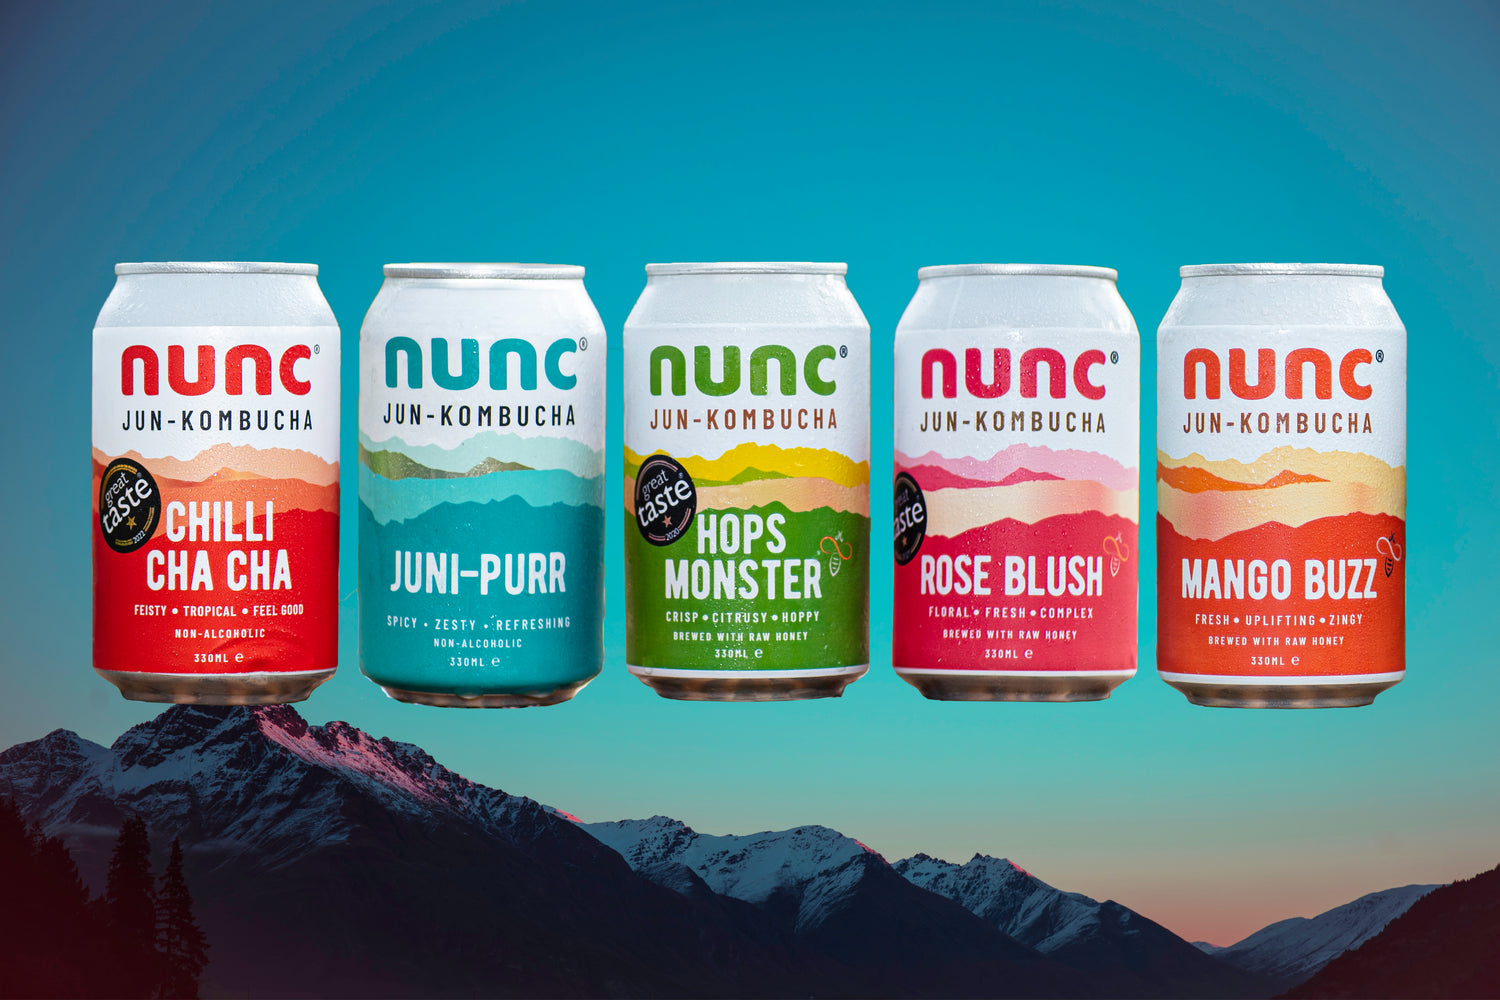 Nunc is made with green tea, raw honey and lots of love. Nunc is gut friendly and made in Buckinghamshire in the UK